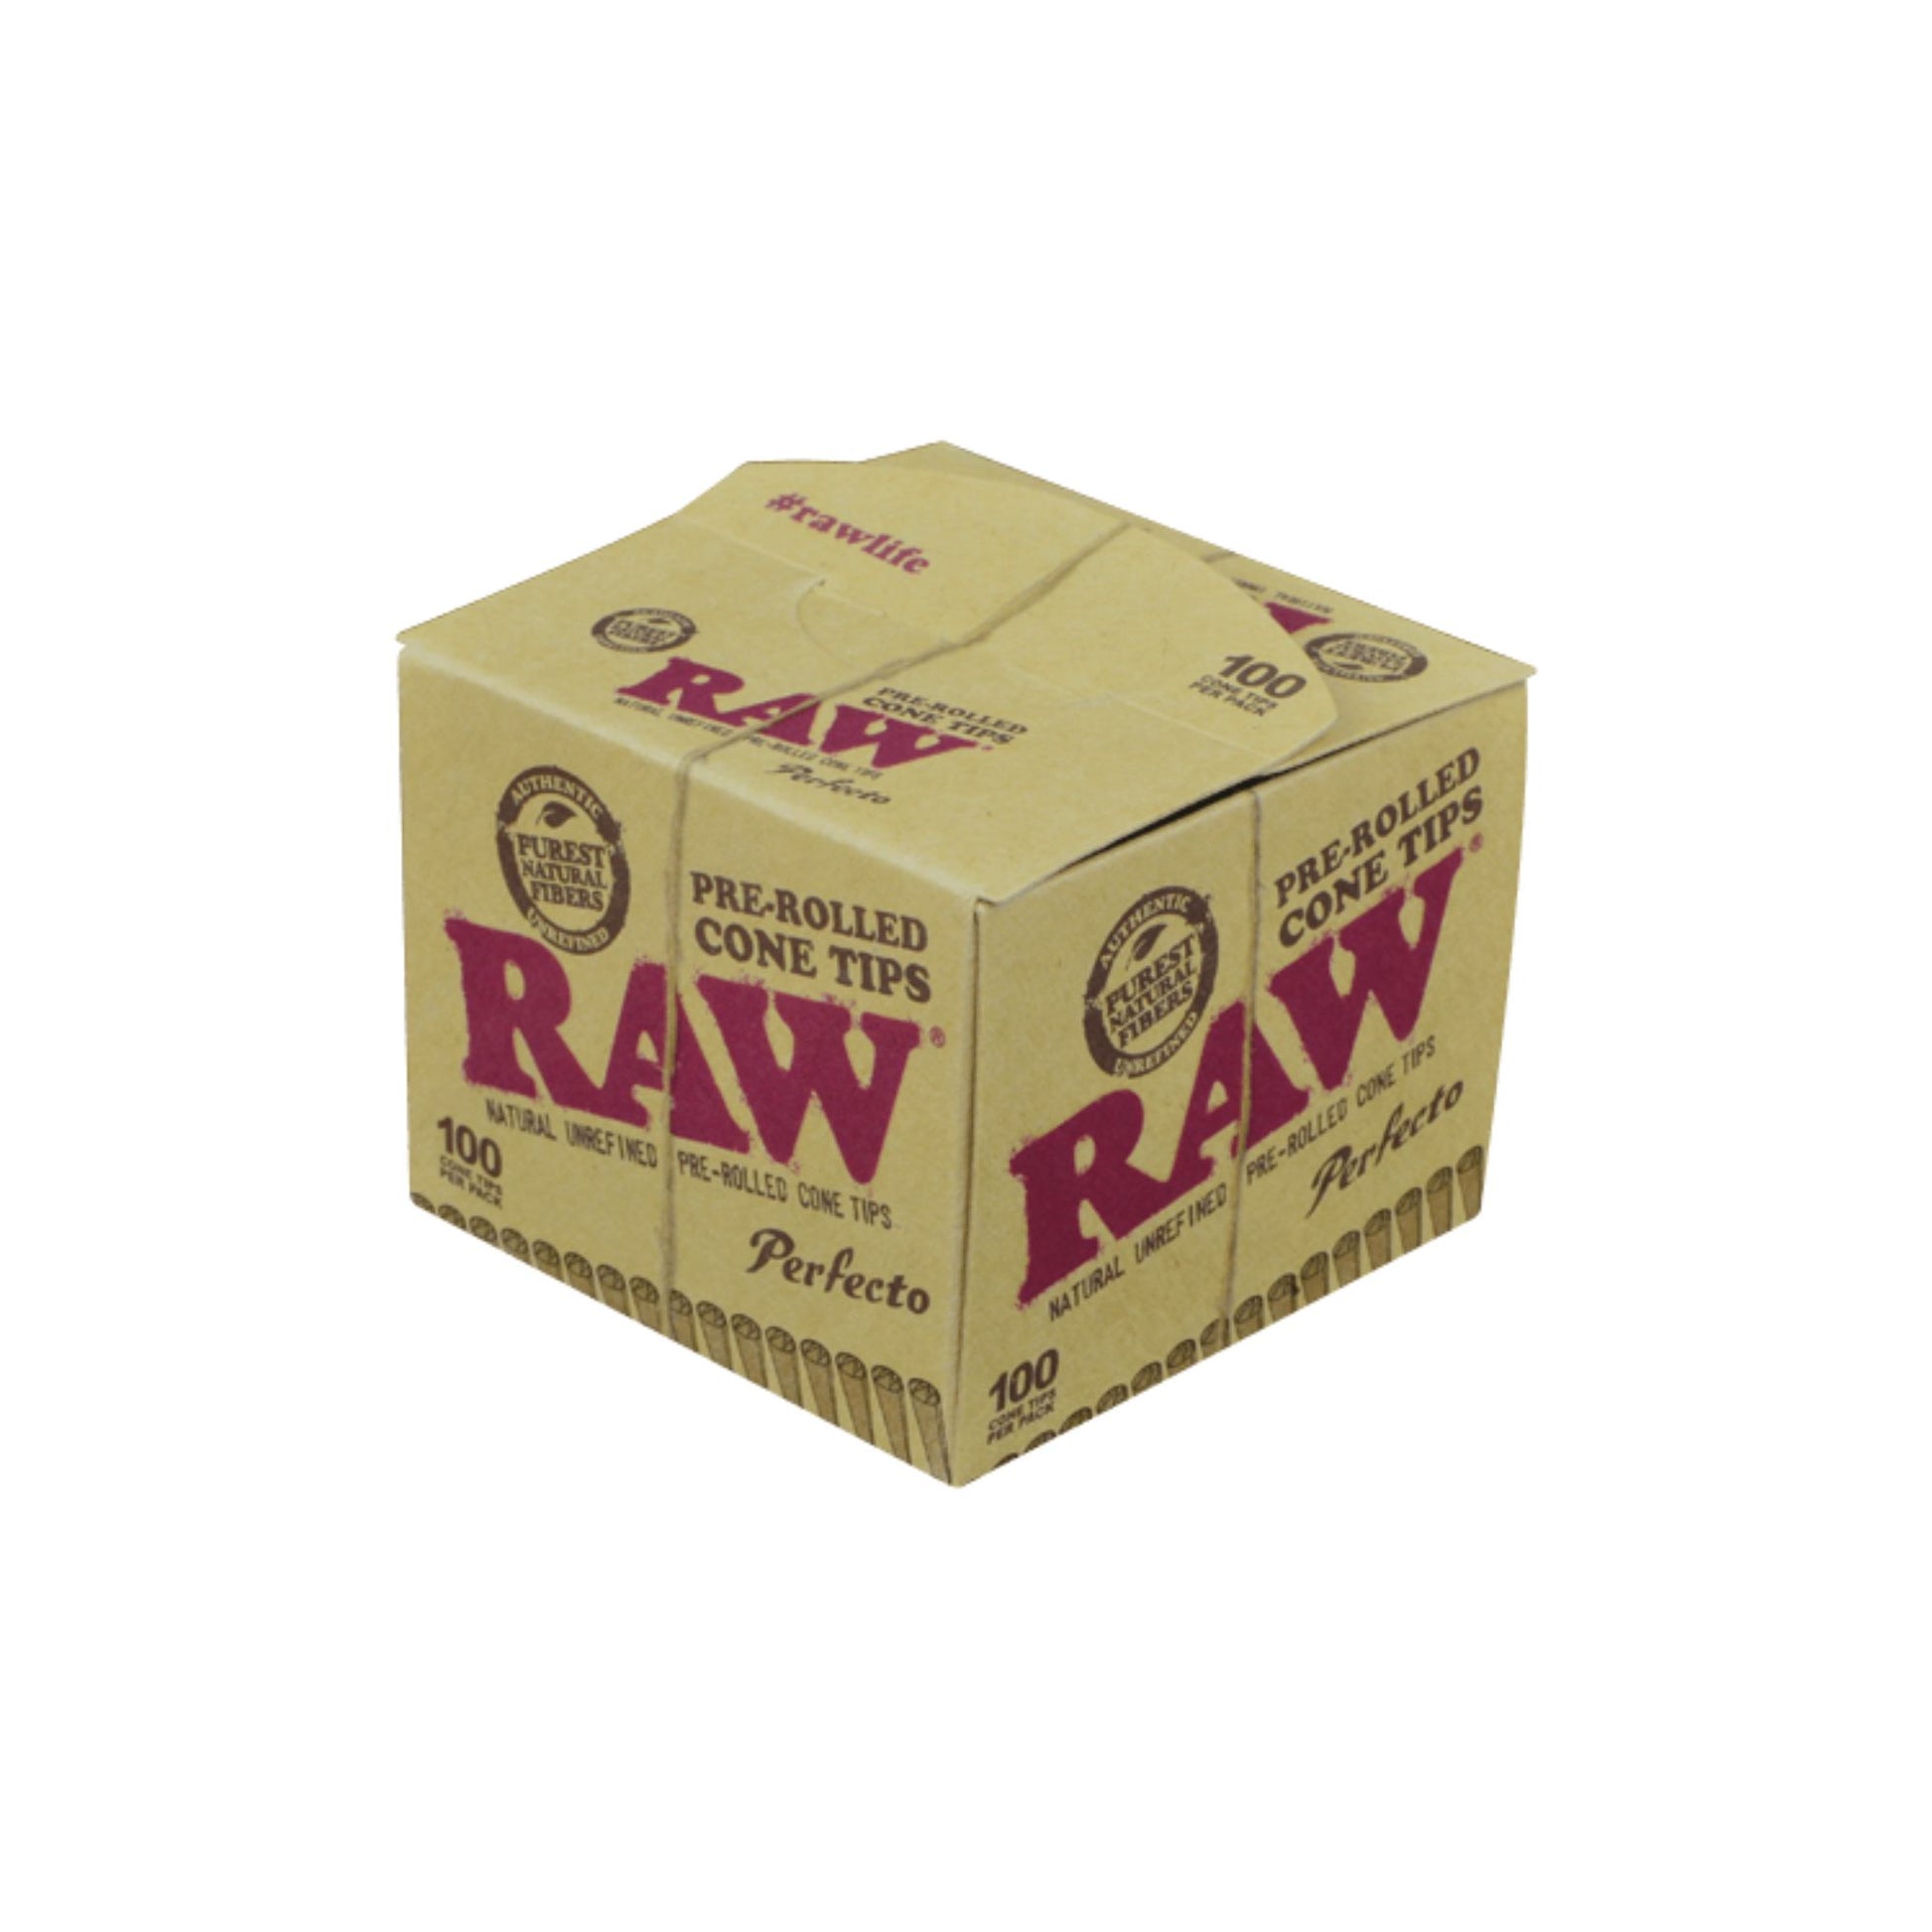 Buy RAW PERFECTO Pre-Rolled Cone Tips online at HighJack India